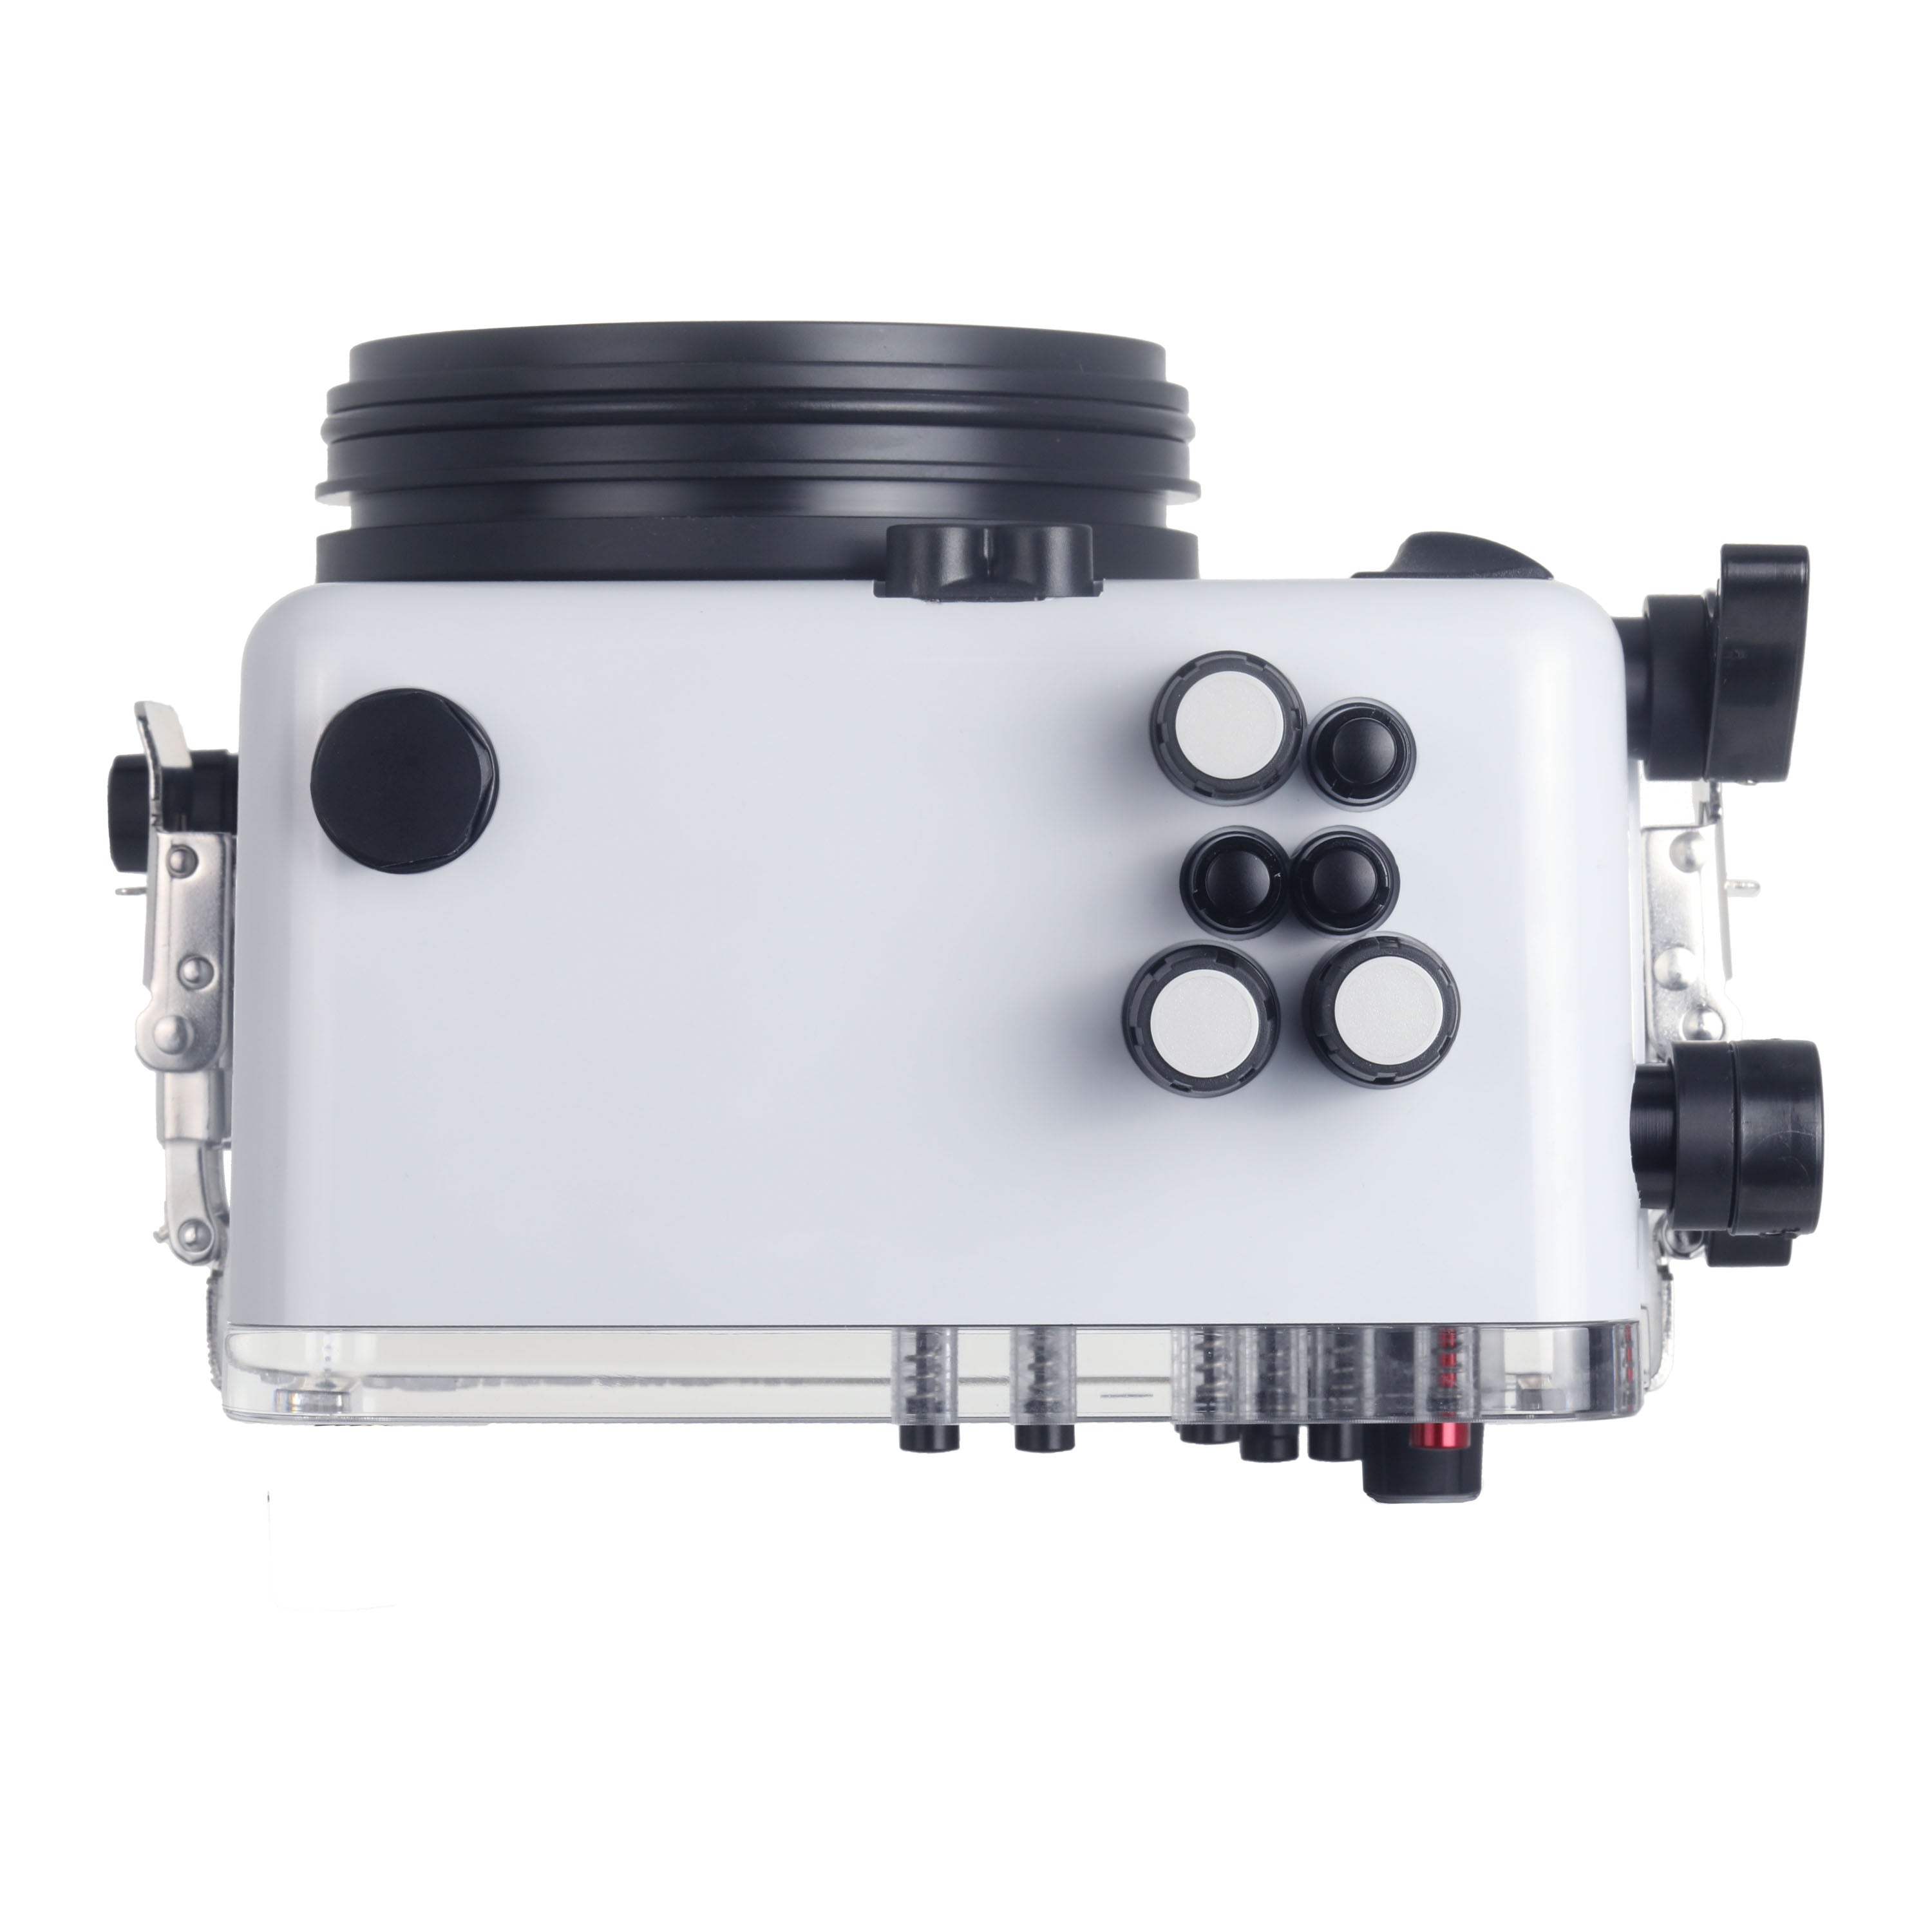 Ikelite 200DLM/A Underwater Housing for Sony Alpha a6100, a6300, a6400, a6500 Mirrorless Cameras